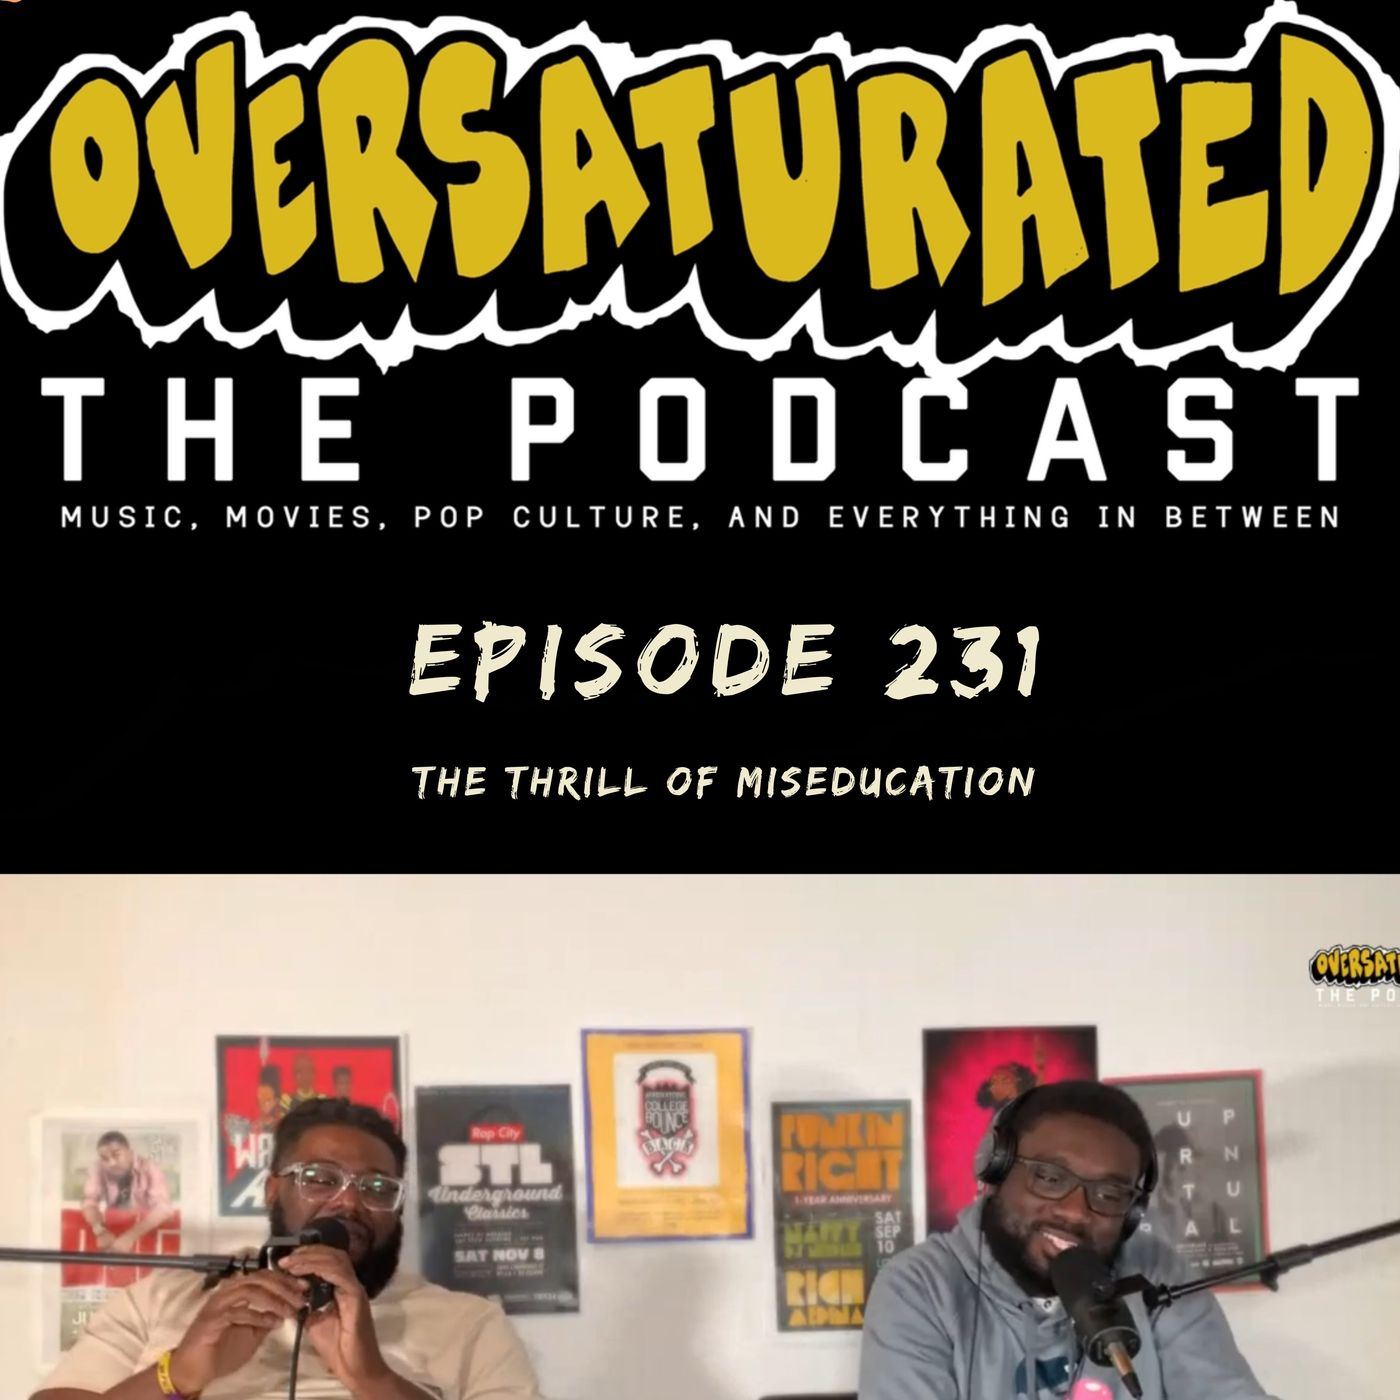 Episode 231 - The Thrill of Miseducation